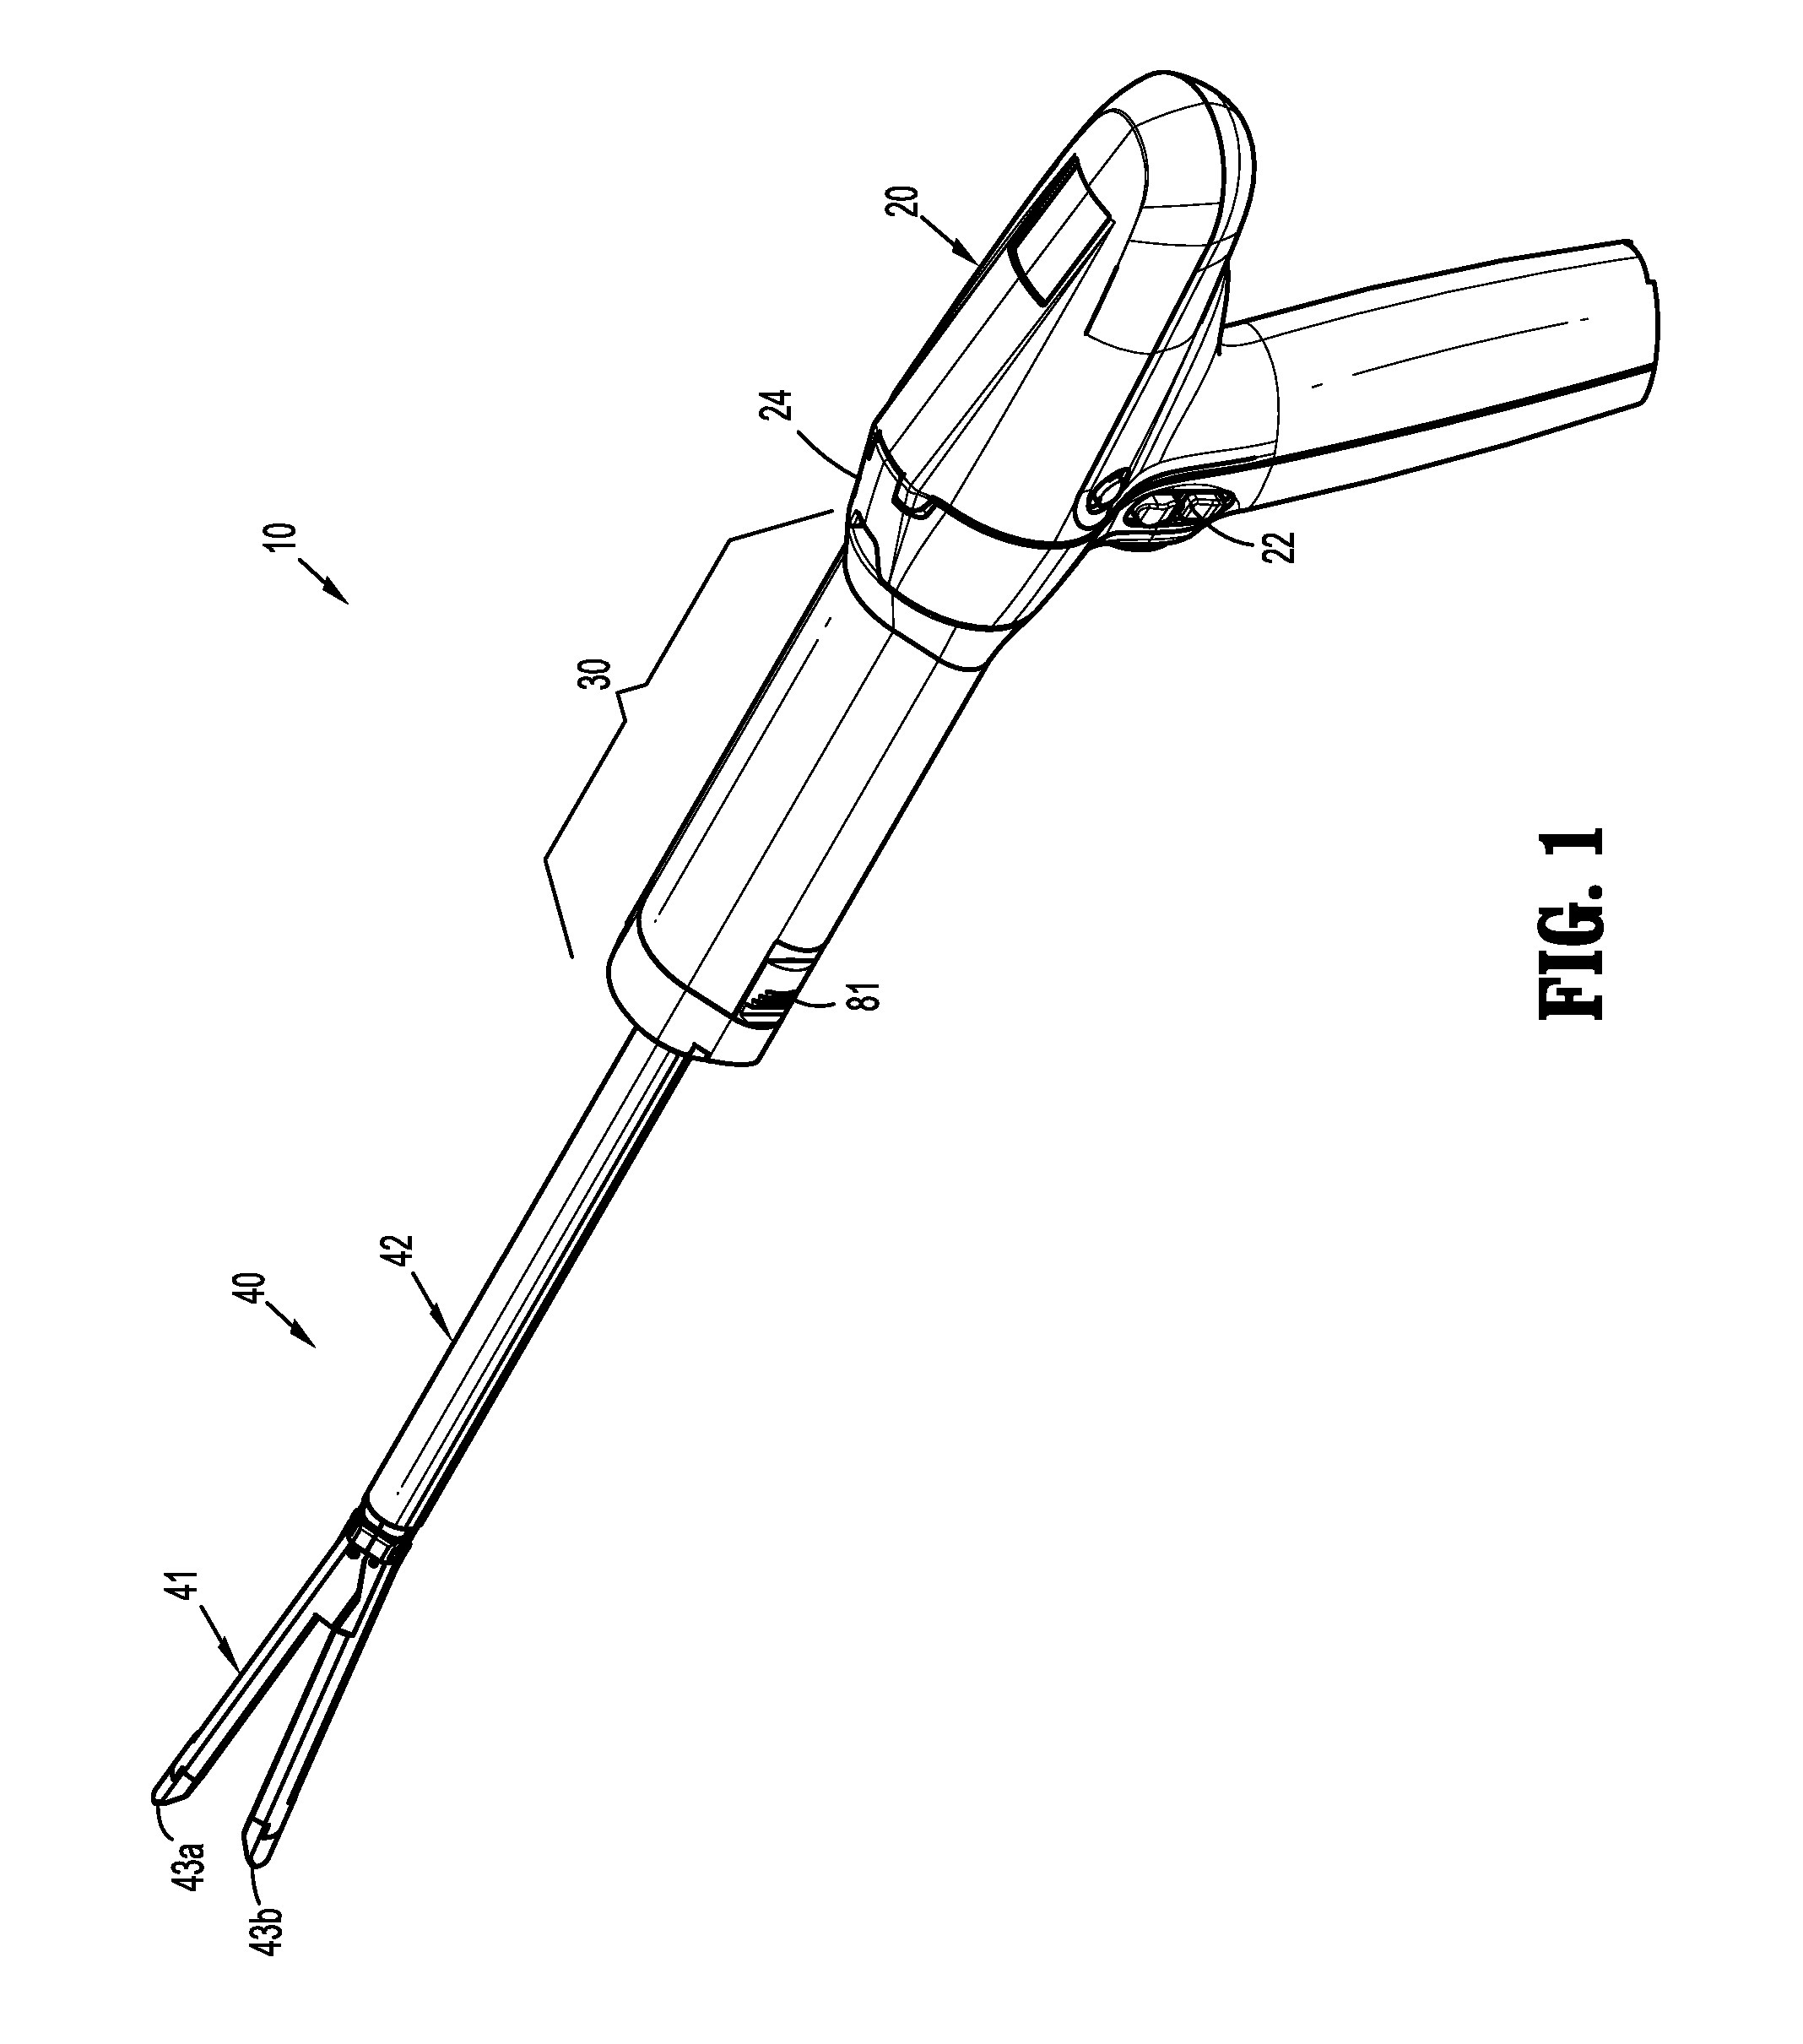 Adaptor for surgical instrument for converting rotary input to linear output